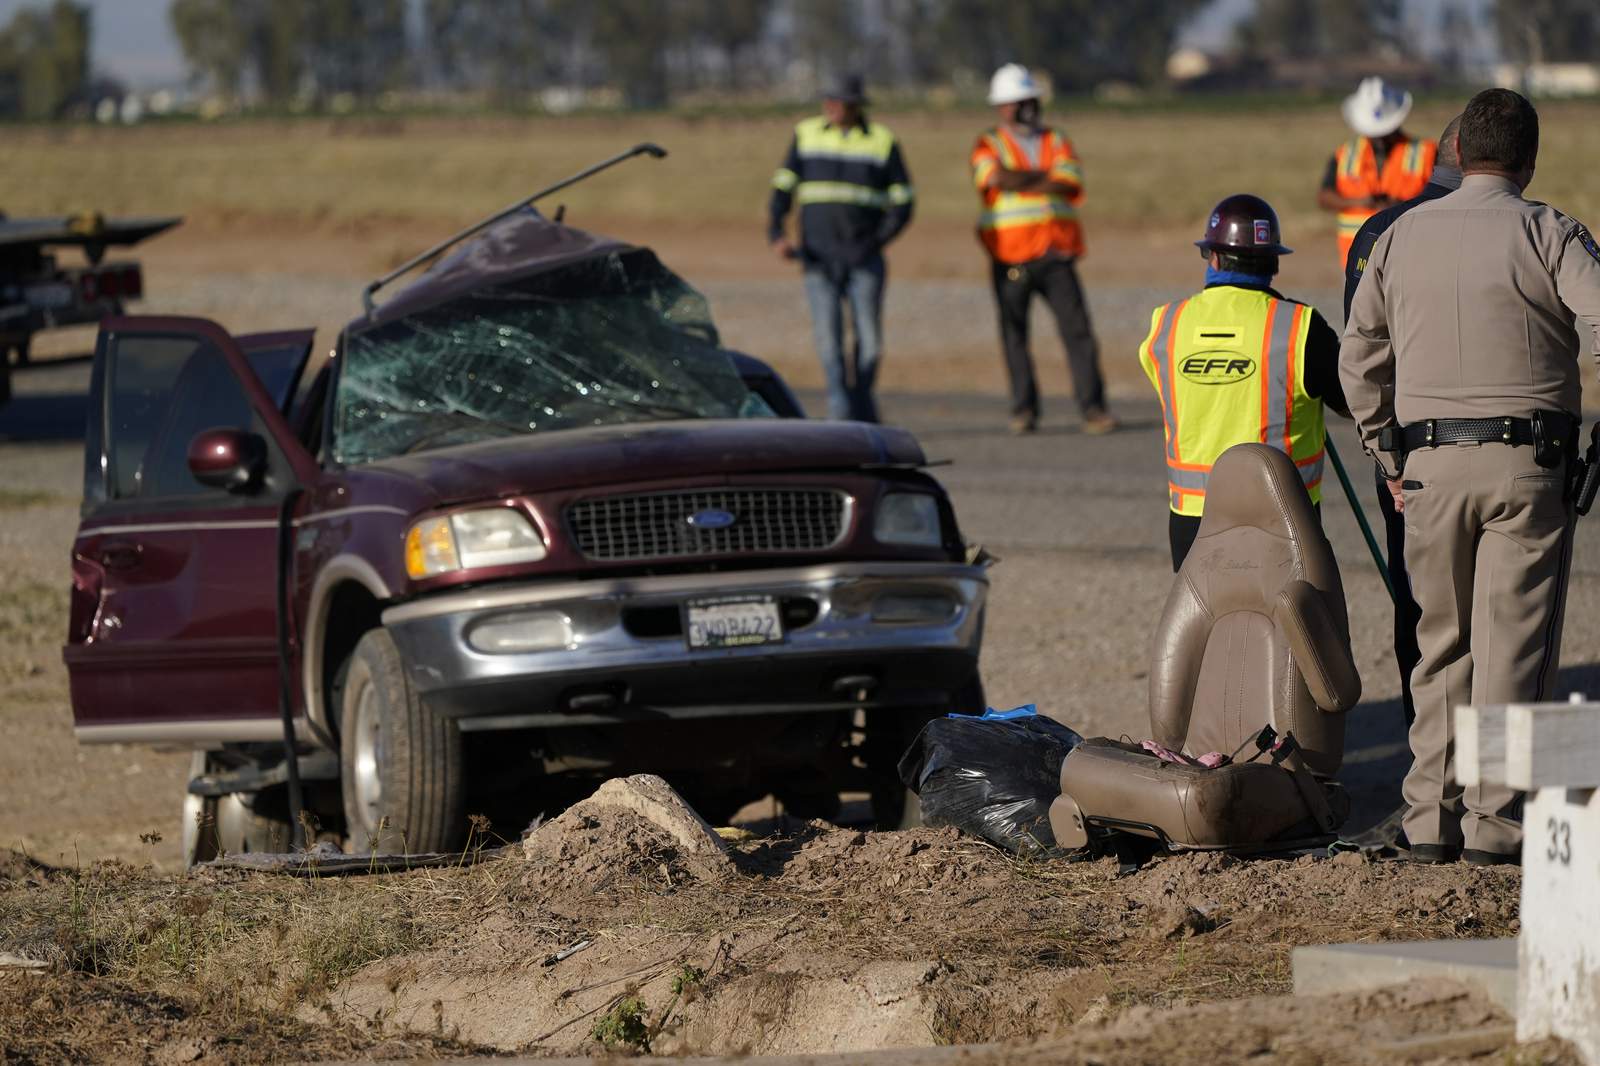 Man charged with smuggling after California crash kills 13